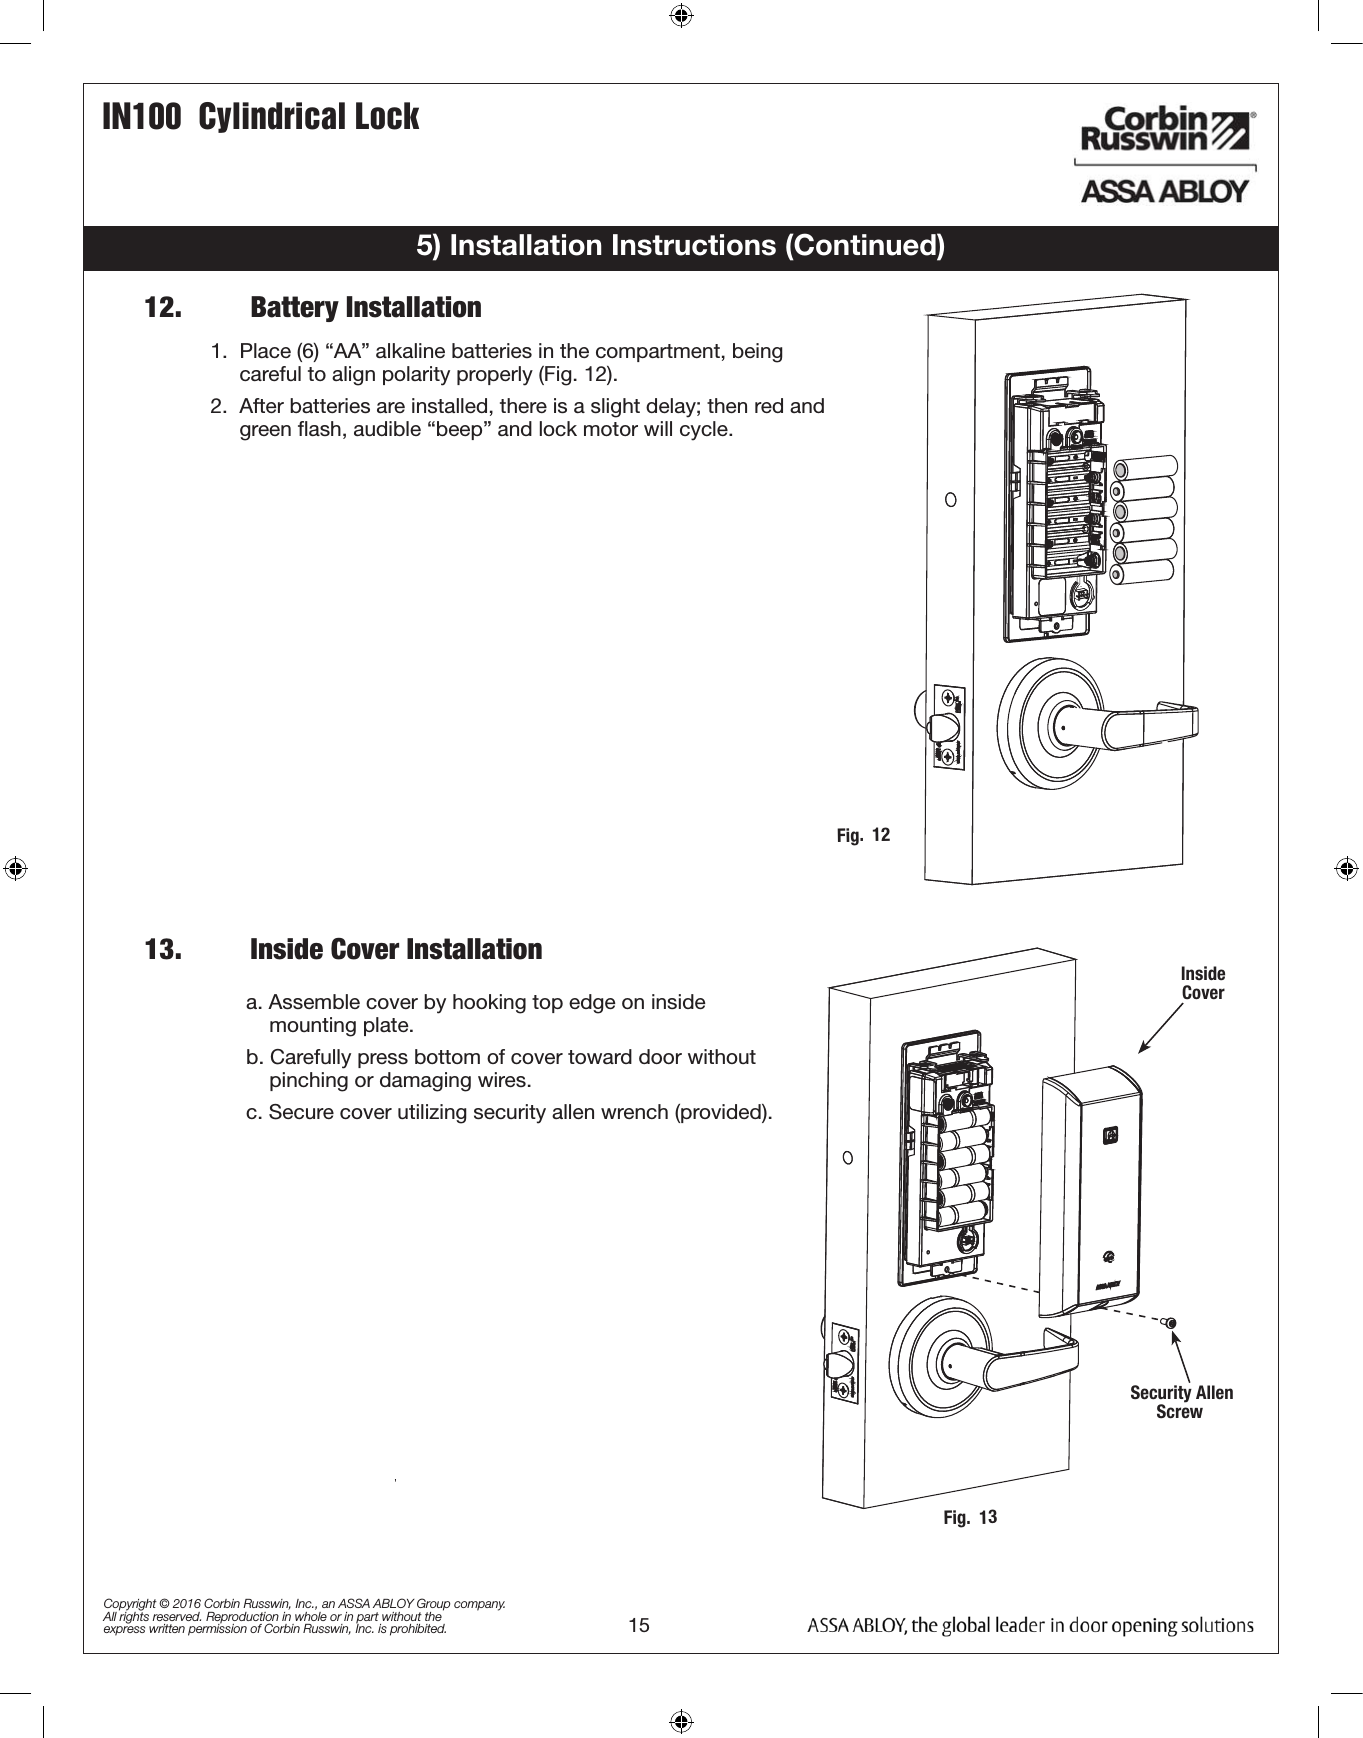 IN100  Cylindrical Lock15Copyright © 2016 Corbin Russwin, Inc., an ASSA ABLOY Group company. All rights reserved. Reproduction in whole or in part without the express written permission of Corbin Russwin, Inc. is prohibited.a. Assemble cover by hooking top edge on inside                     mounting plate.b. Carefully press bottom of cover toward door without           pinching or damaging wires.c. Secure cover utilizing security allen wrench (provided).5) Installation Instructions (Continued)12.         Battery InstallationInside Cover Security Allen Screw13.         Inside Cover InstallationFig.  12Fig.  131.  Place (6) “AA” alkaline batteries in the compartment, being            careful to align polarity properly (Fig. 12).2.  After batteries are installed, there is a slight delay; then red and       green ﬂash, audible “beep” and lock motor will cycle. 